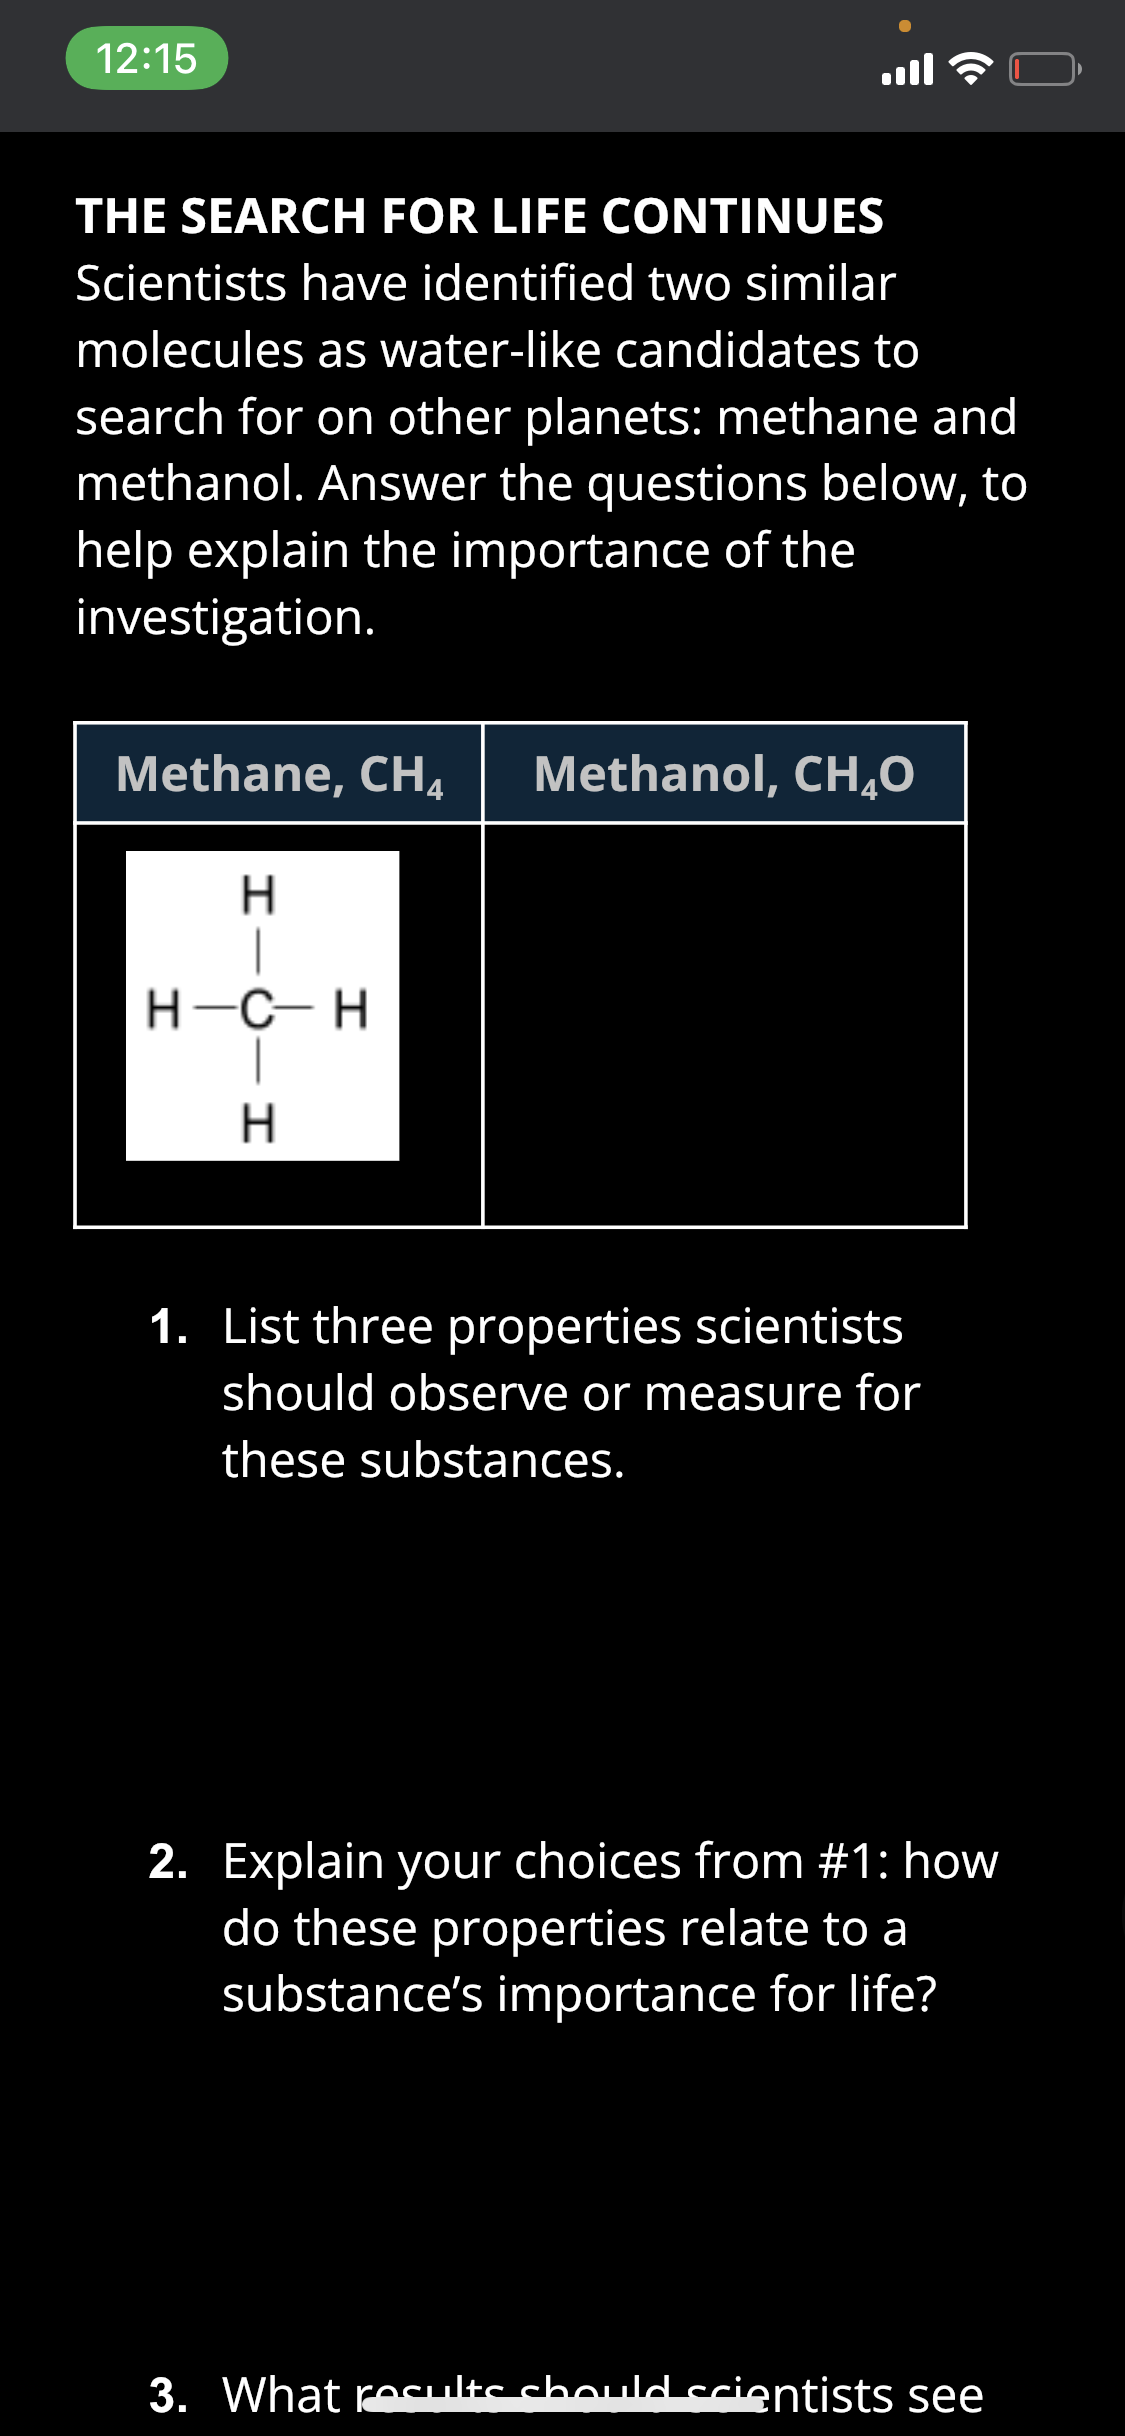 12:15
ll
THE SEARCH FOR LIFE CONTINUES
Scientists have identified two similar
molecules as water-like candidates to
search for on other planets: methane and
methanol. Answer the questions below, to
help explain the importance of the
investigation.
Methane, CH4
Methanol, CH,0
H-C- H
H.
1. List three properties scientists
should observe or measure for
these substances.
2. Explain your choices from #1: how
do these properties relate to a
substance's importance for life?
3. What recults chould crientists see
エーO
